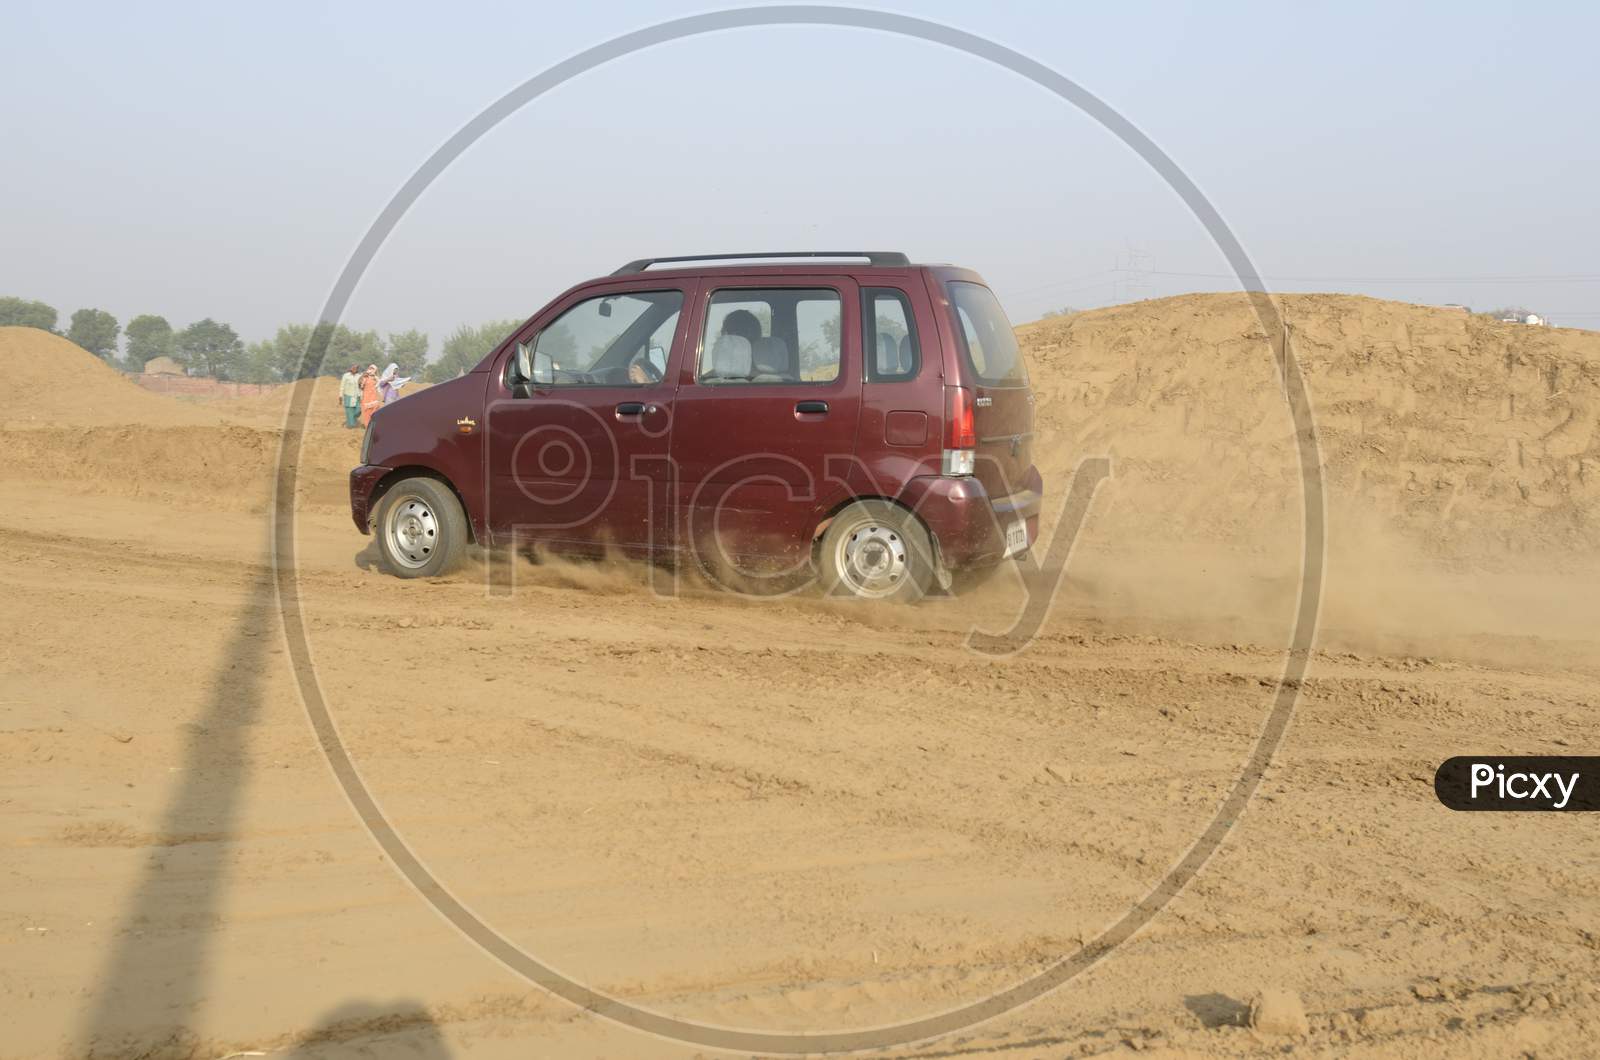 Suzuki WagonR Car Or  Off-Road Vehicle  in an Rally Championship  With Drifting And Sand and Soil  Splashes on Rally Tracks